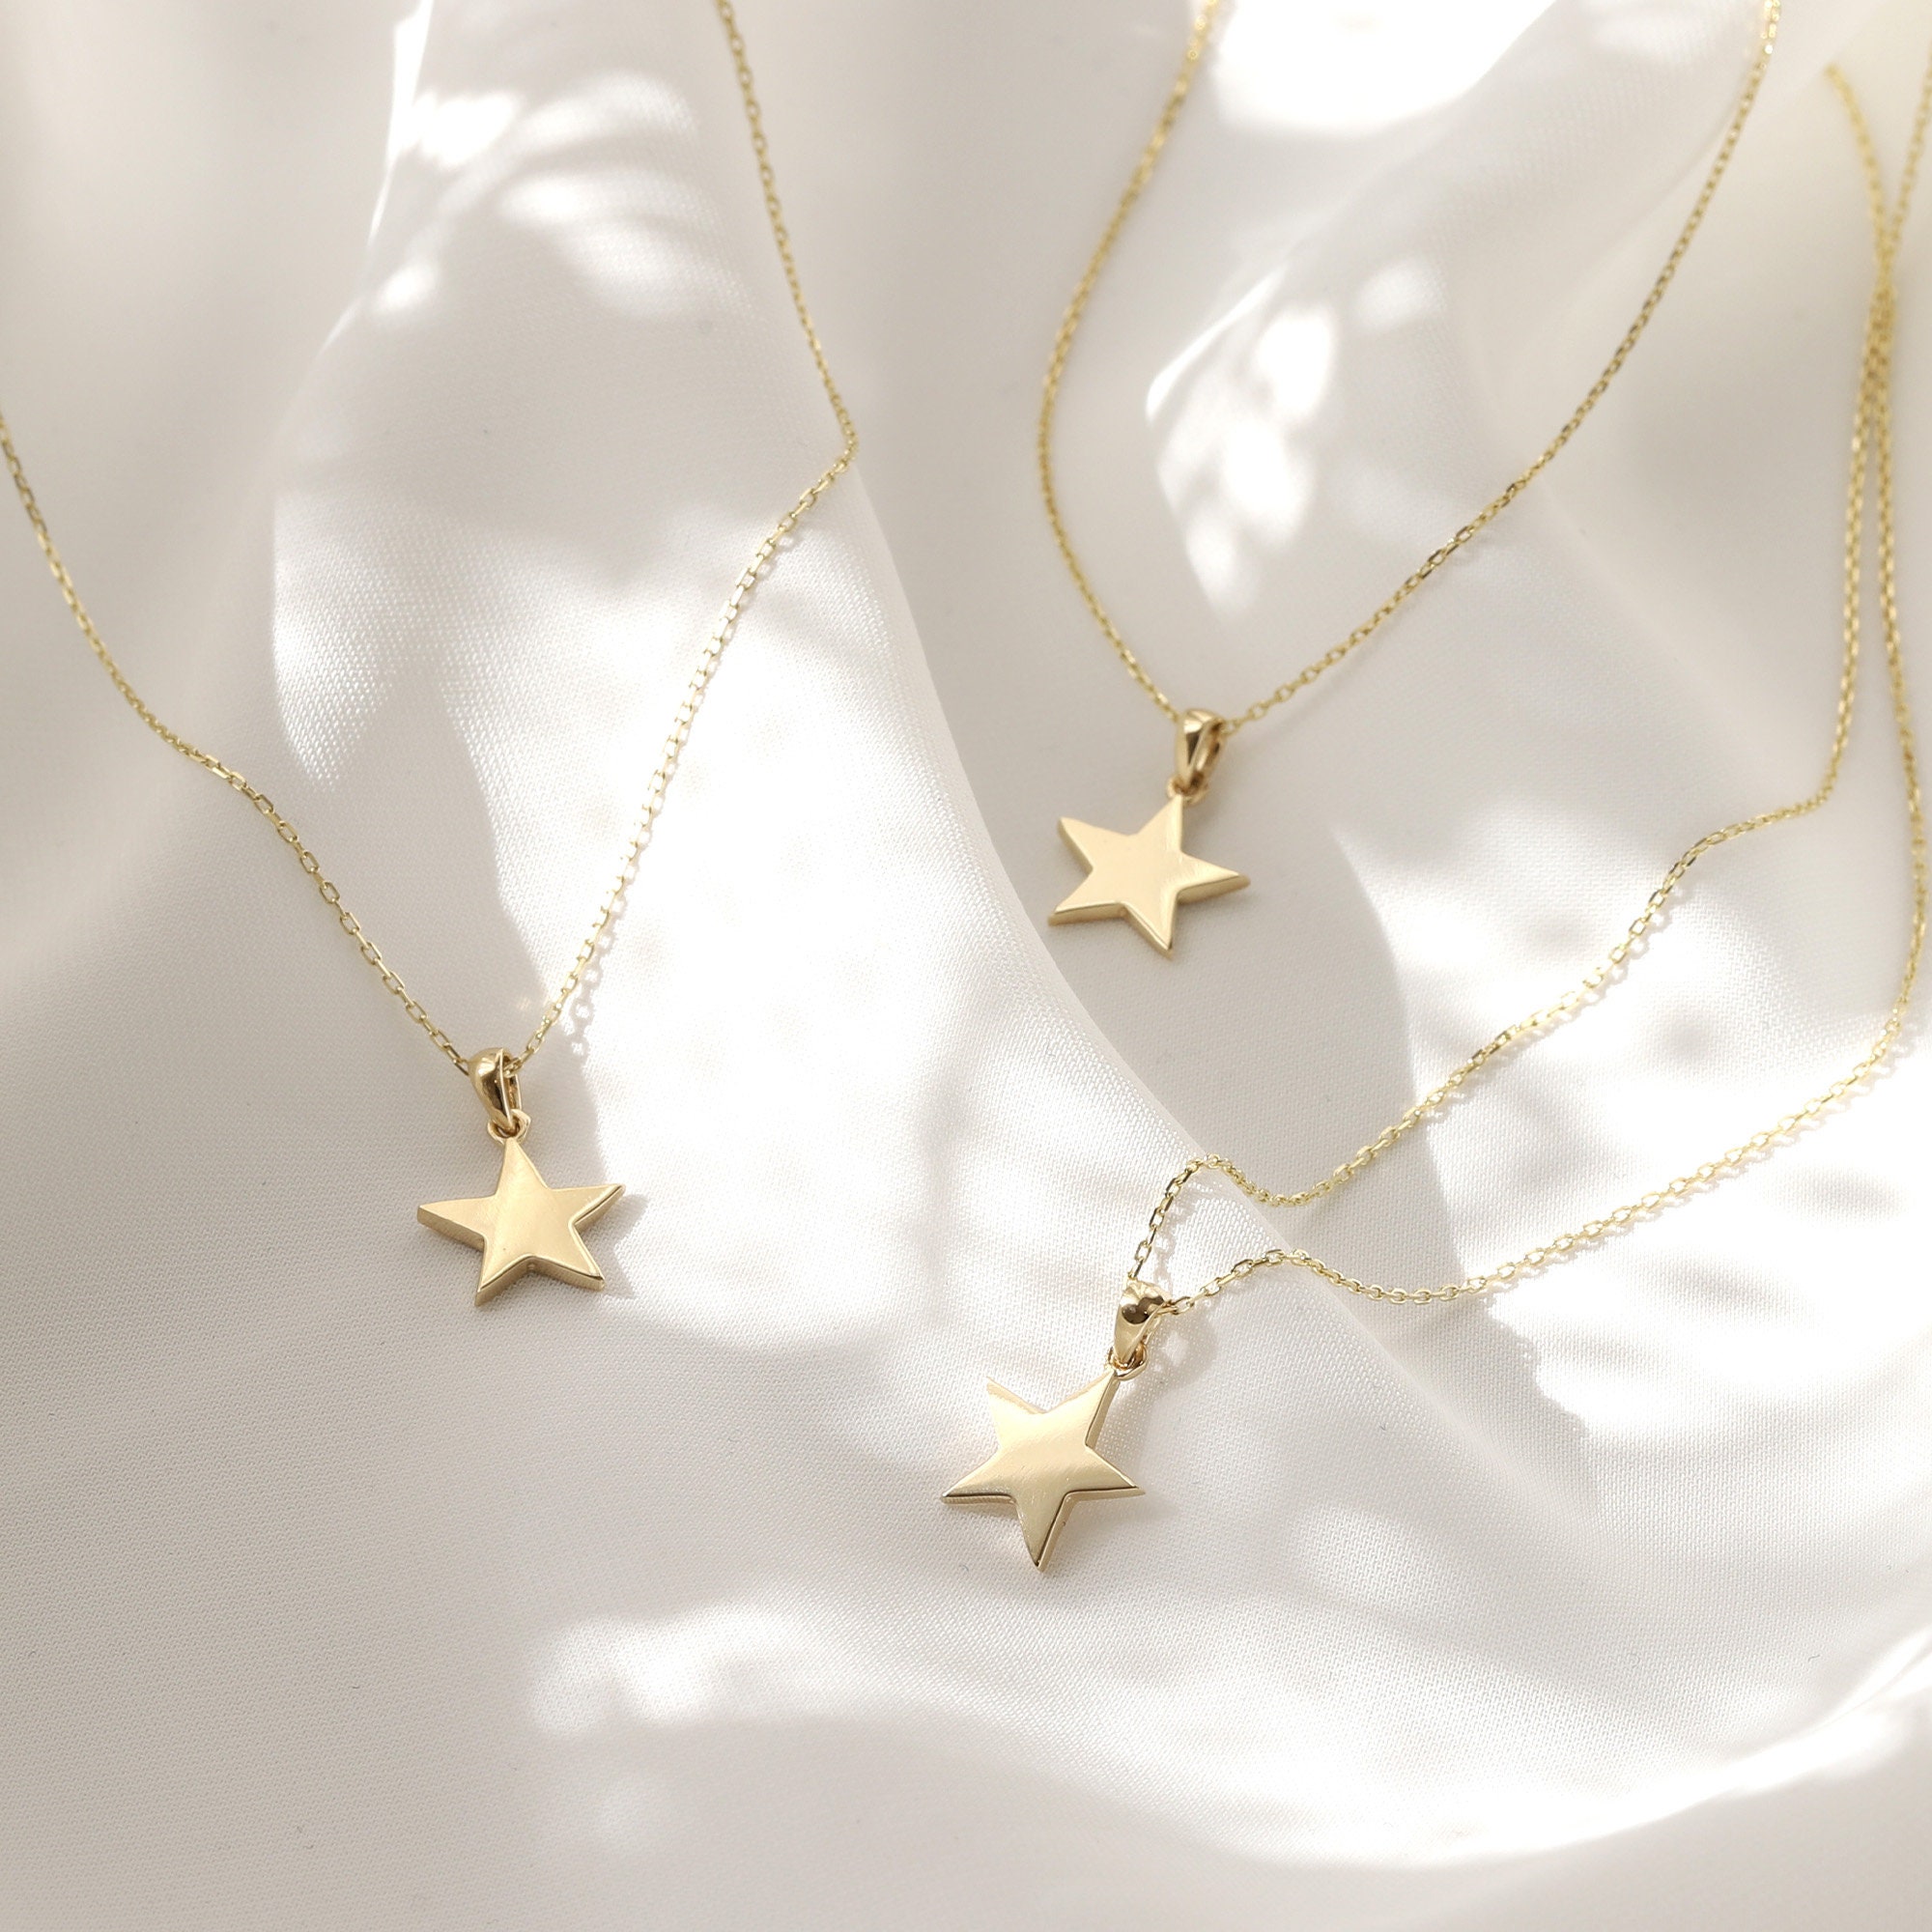 12x12mm 24k Gold Filled Star Charms, Gold Star Pendant, Celestial Jewelry  Minimalist Jewelry Making supply, D-683